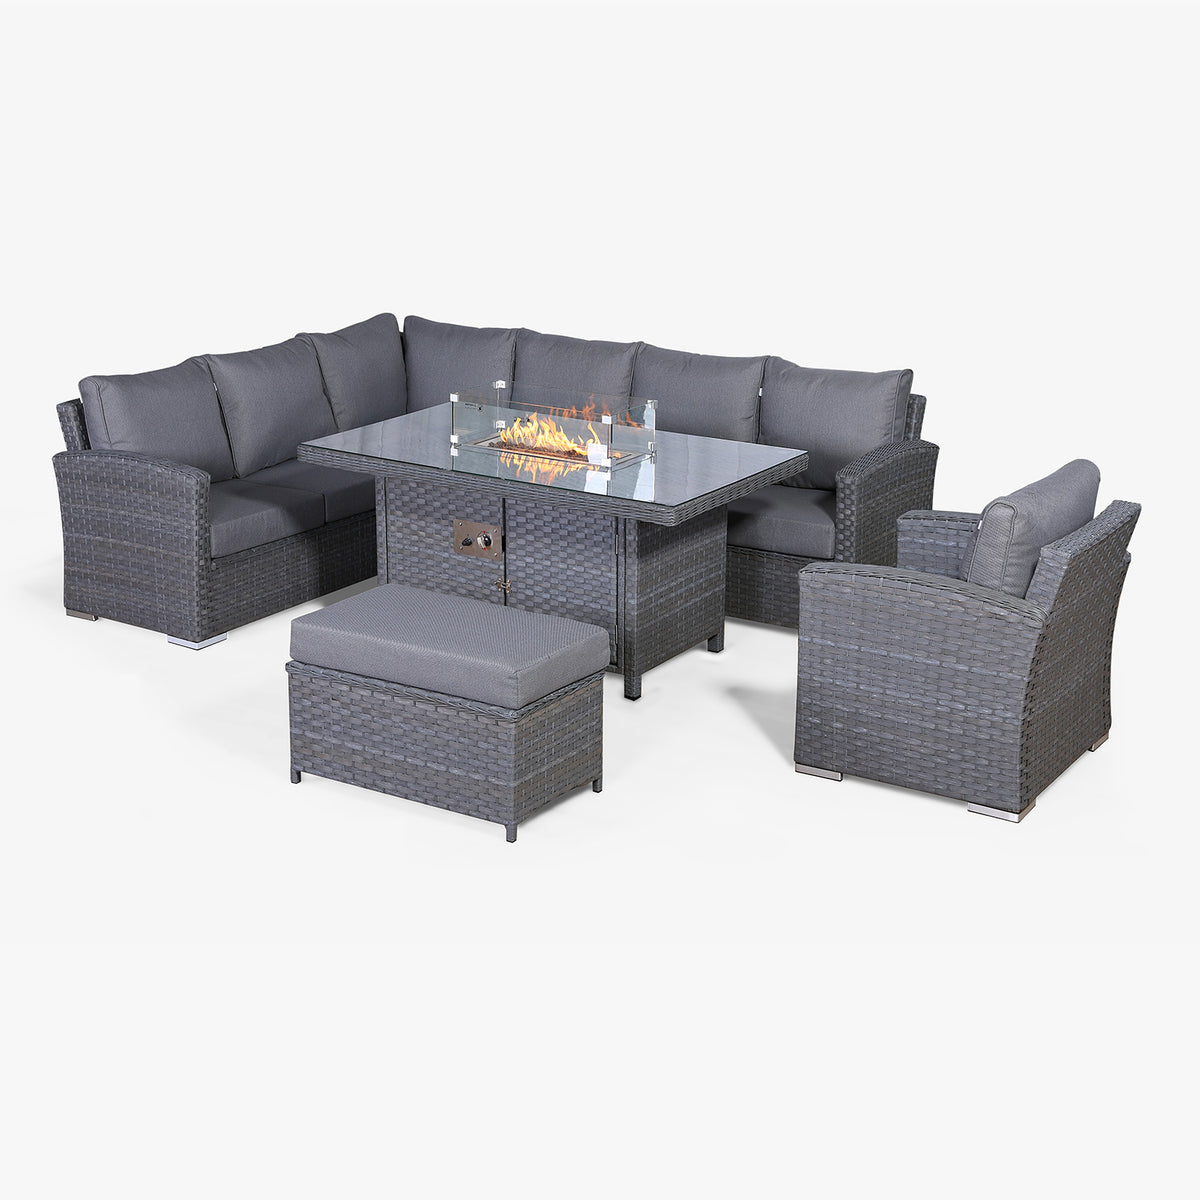 Rattan Park Victoria High Back Left Hand Corner Sofa Set with Arm Chair & Fire Pit Table in Slate Grey Weave